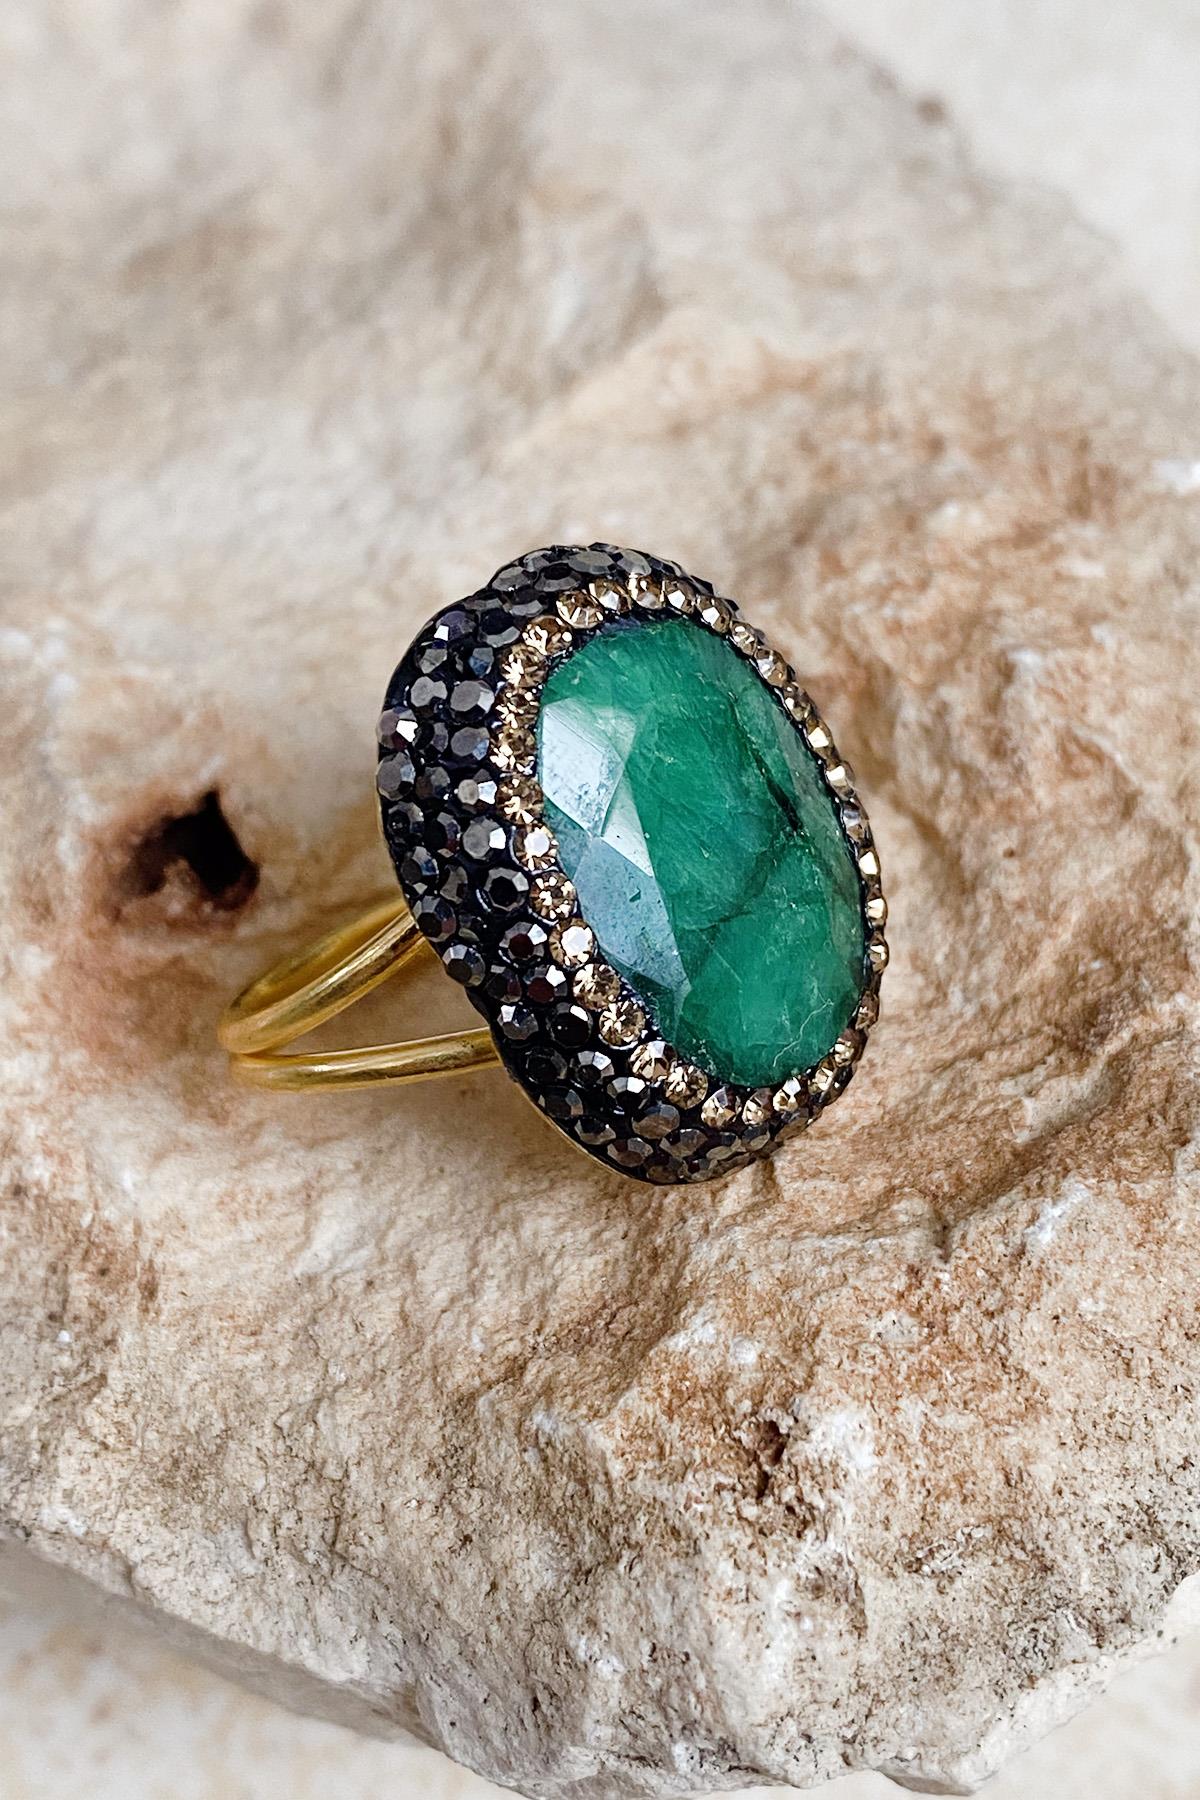 Acacia Series Green Emerald Natural Stone Handcrafted Women's Ring Adjustable Size